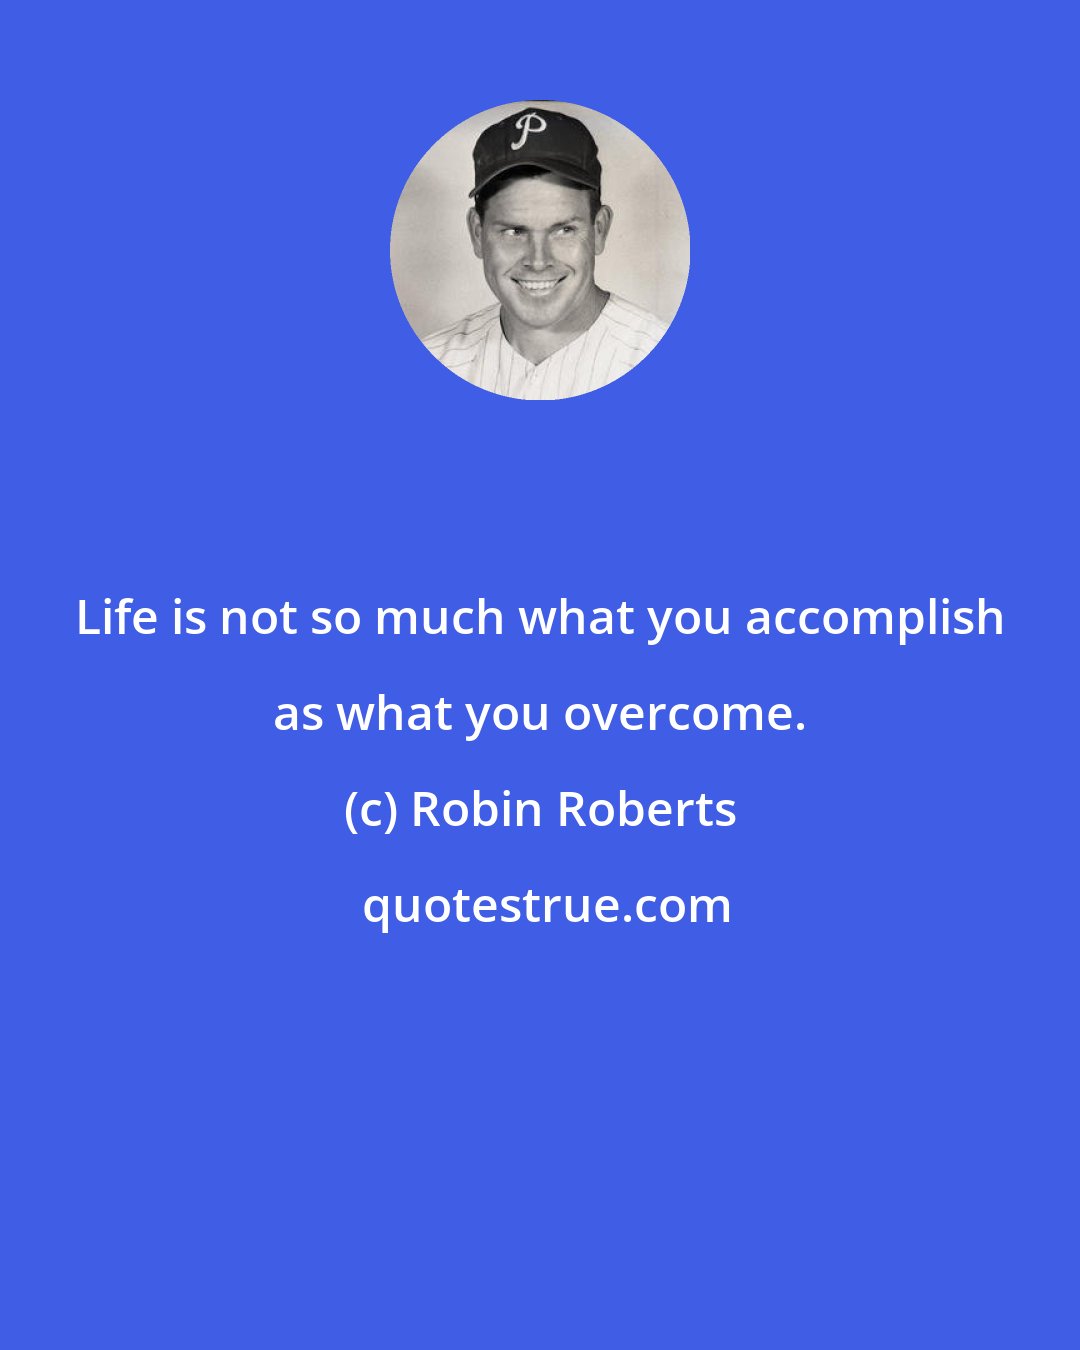 Robin Roberts: Life is not so much what you accomplish as what you overcome.